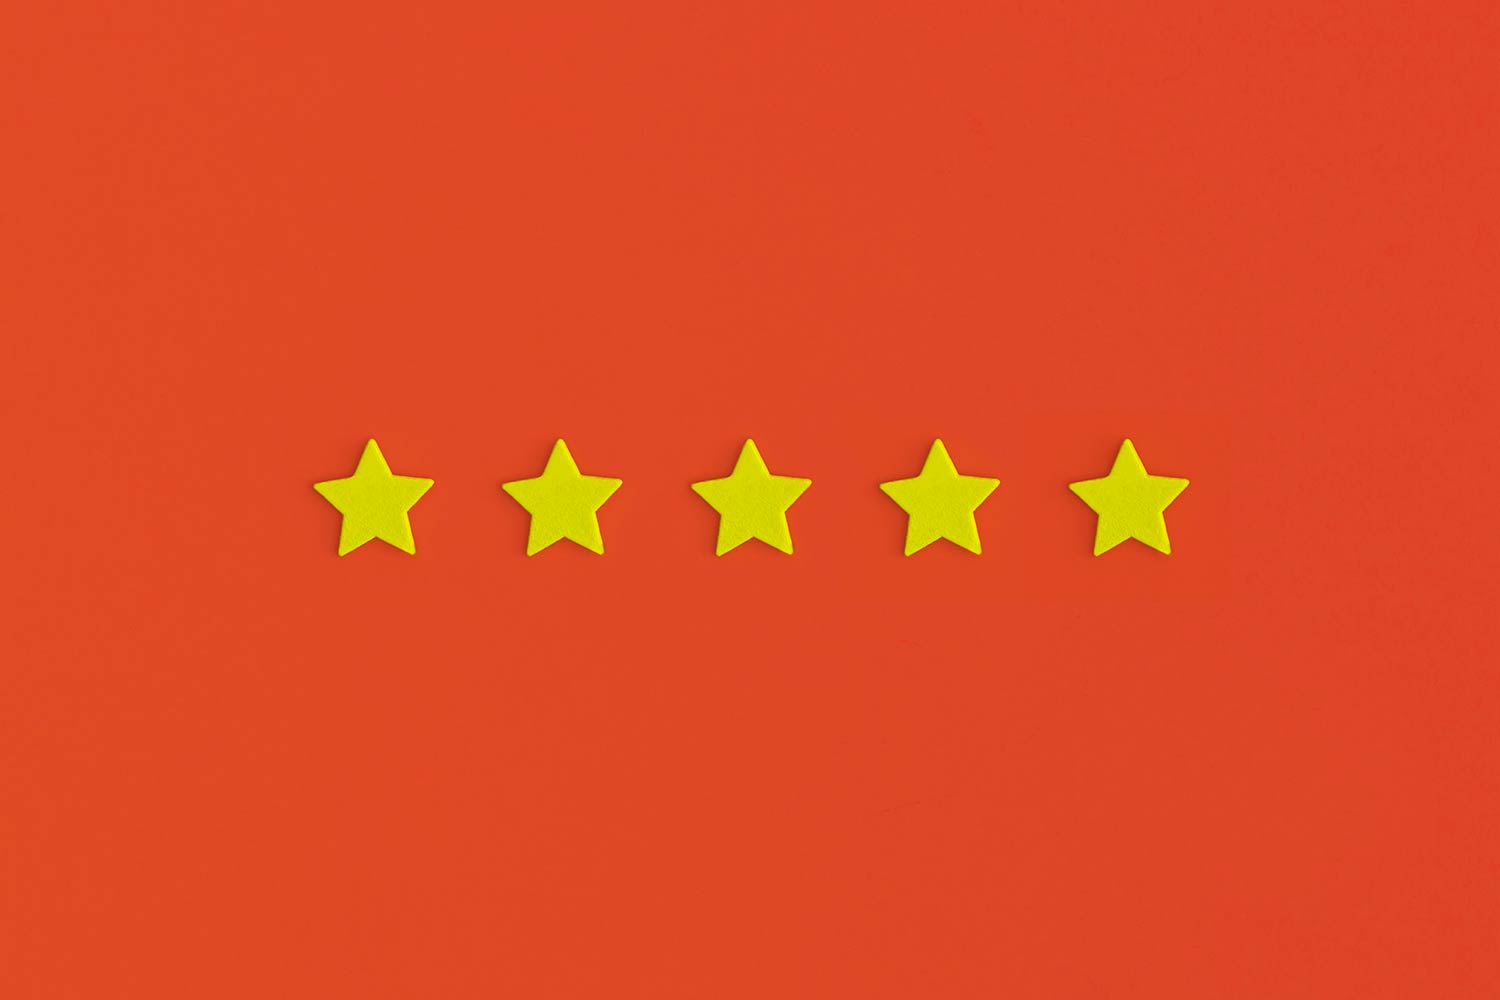 Hotel rating